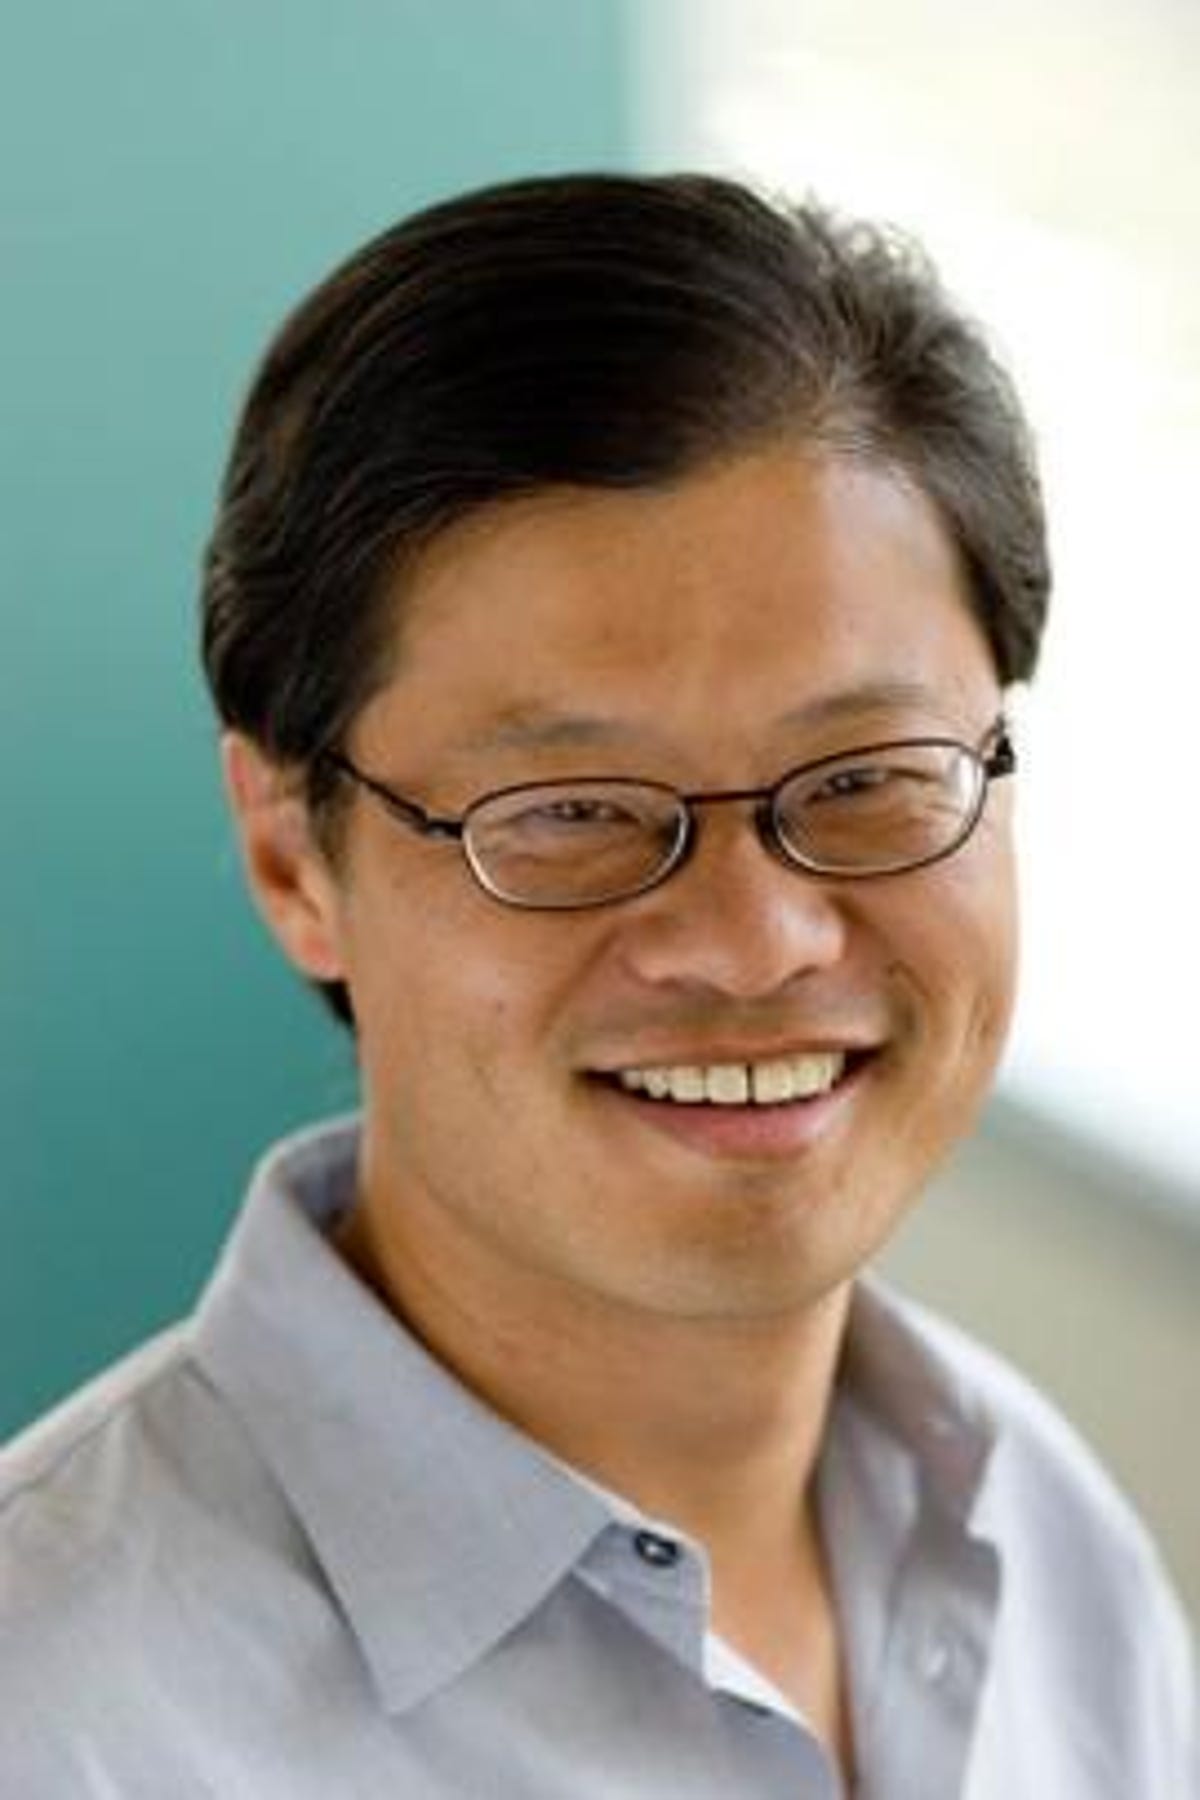 Outgoing CEO Jerry Yang